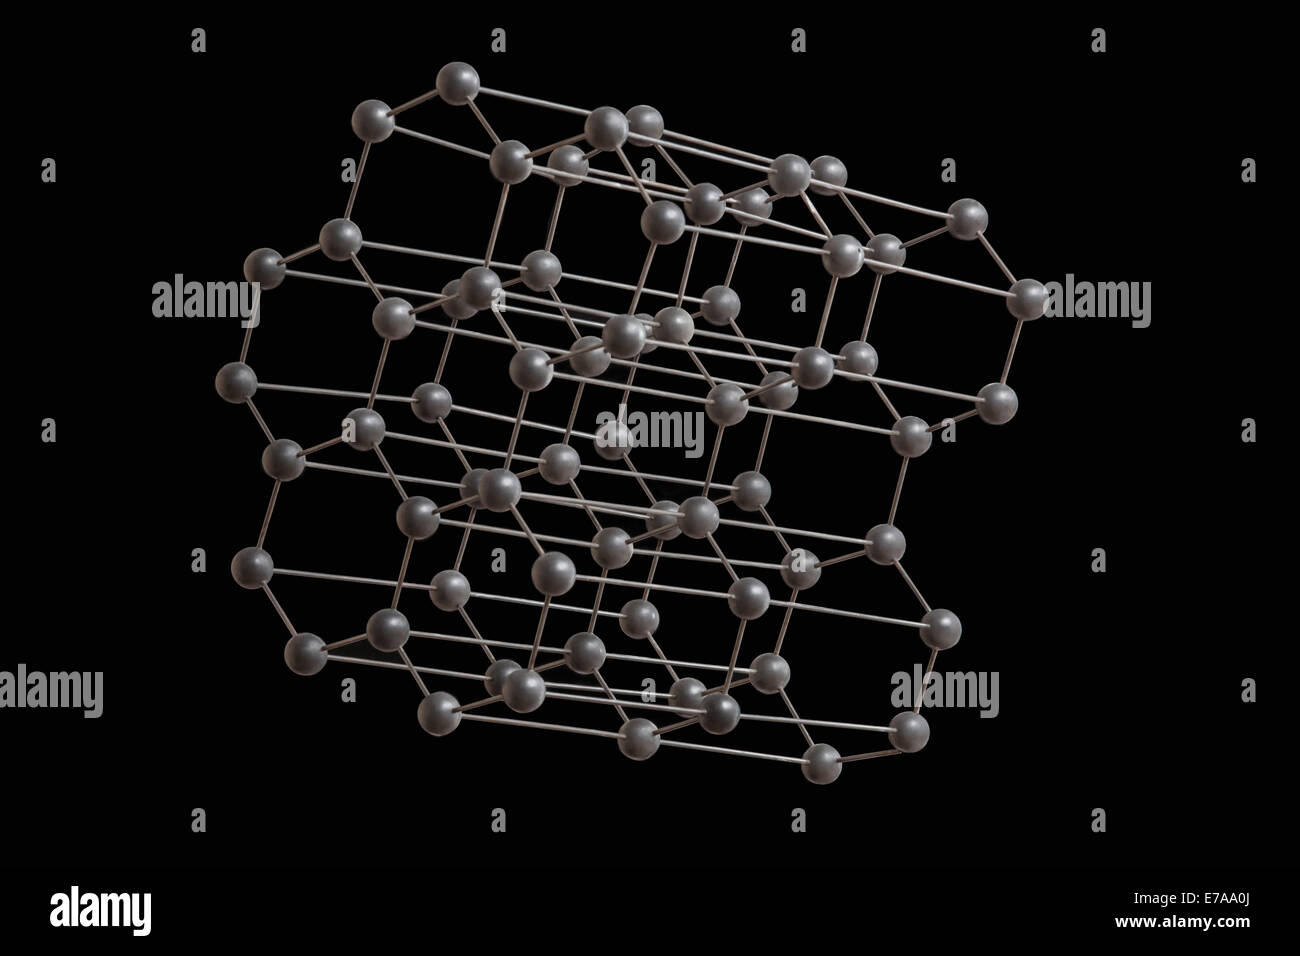 Molecular structure against black background Stock Photo